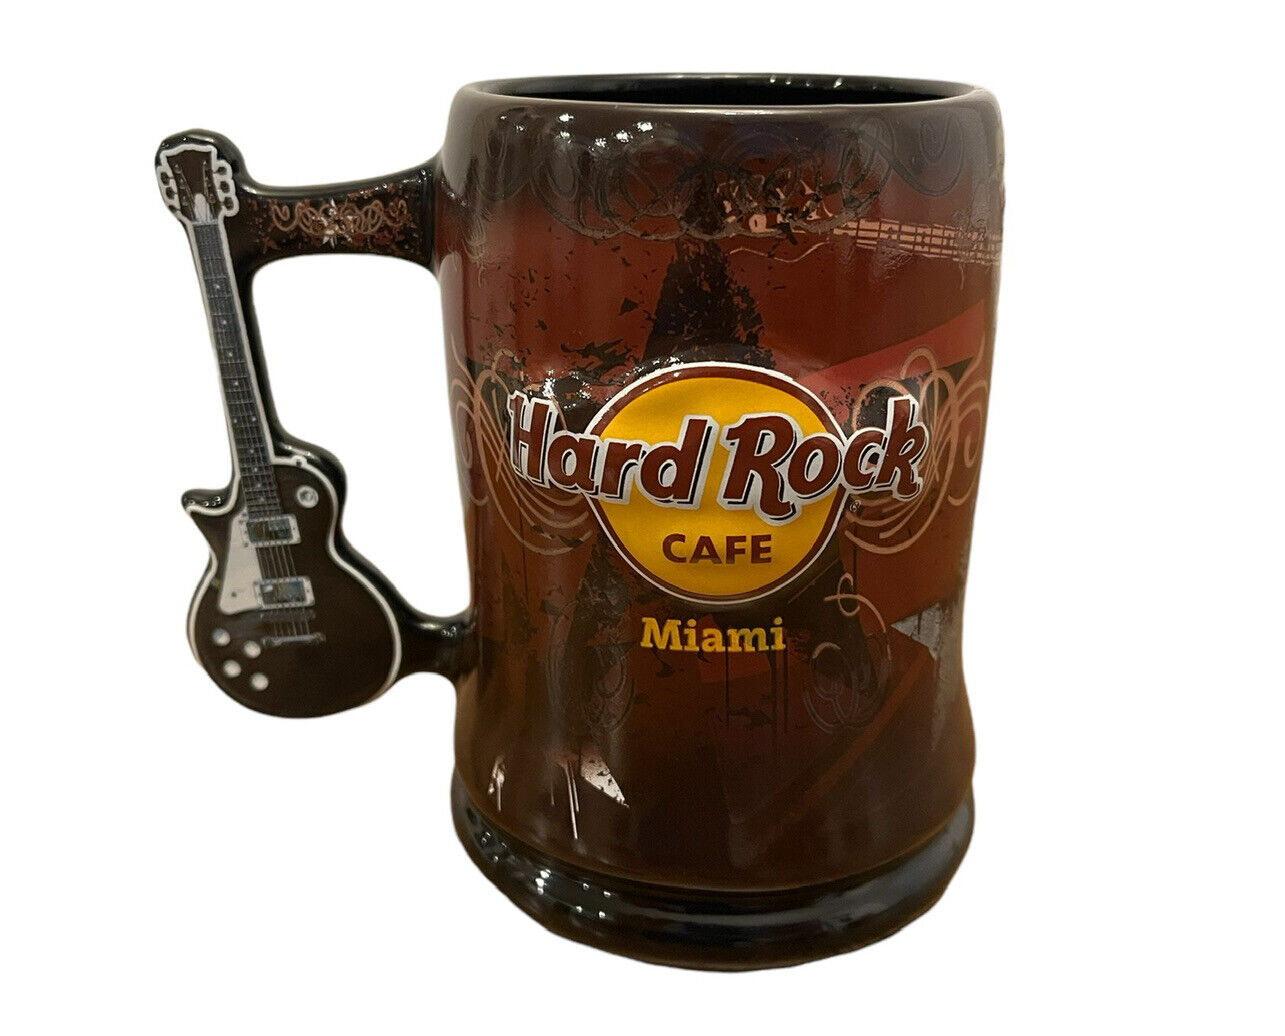 Hard Rock Cafe Miami Beer Coffee Mug Cup Stein Black Guitar Handle See Comments